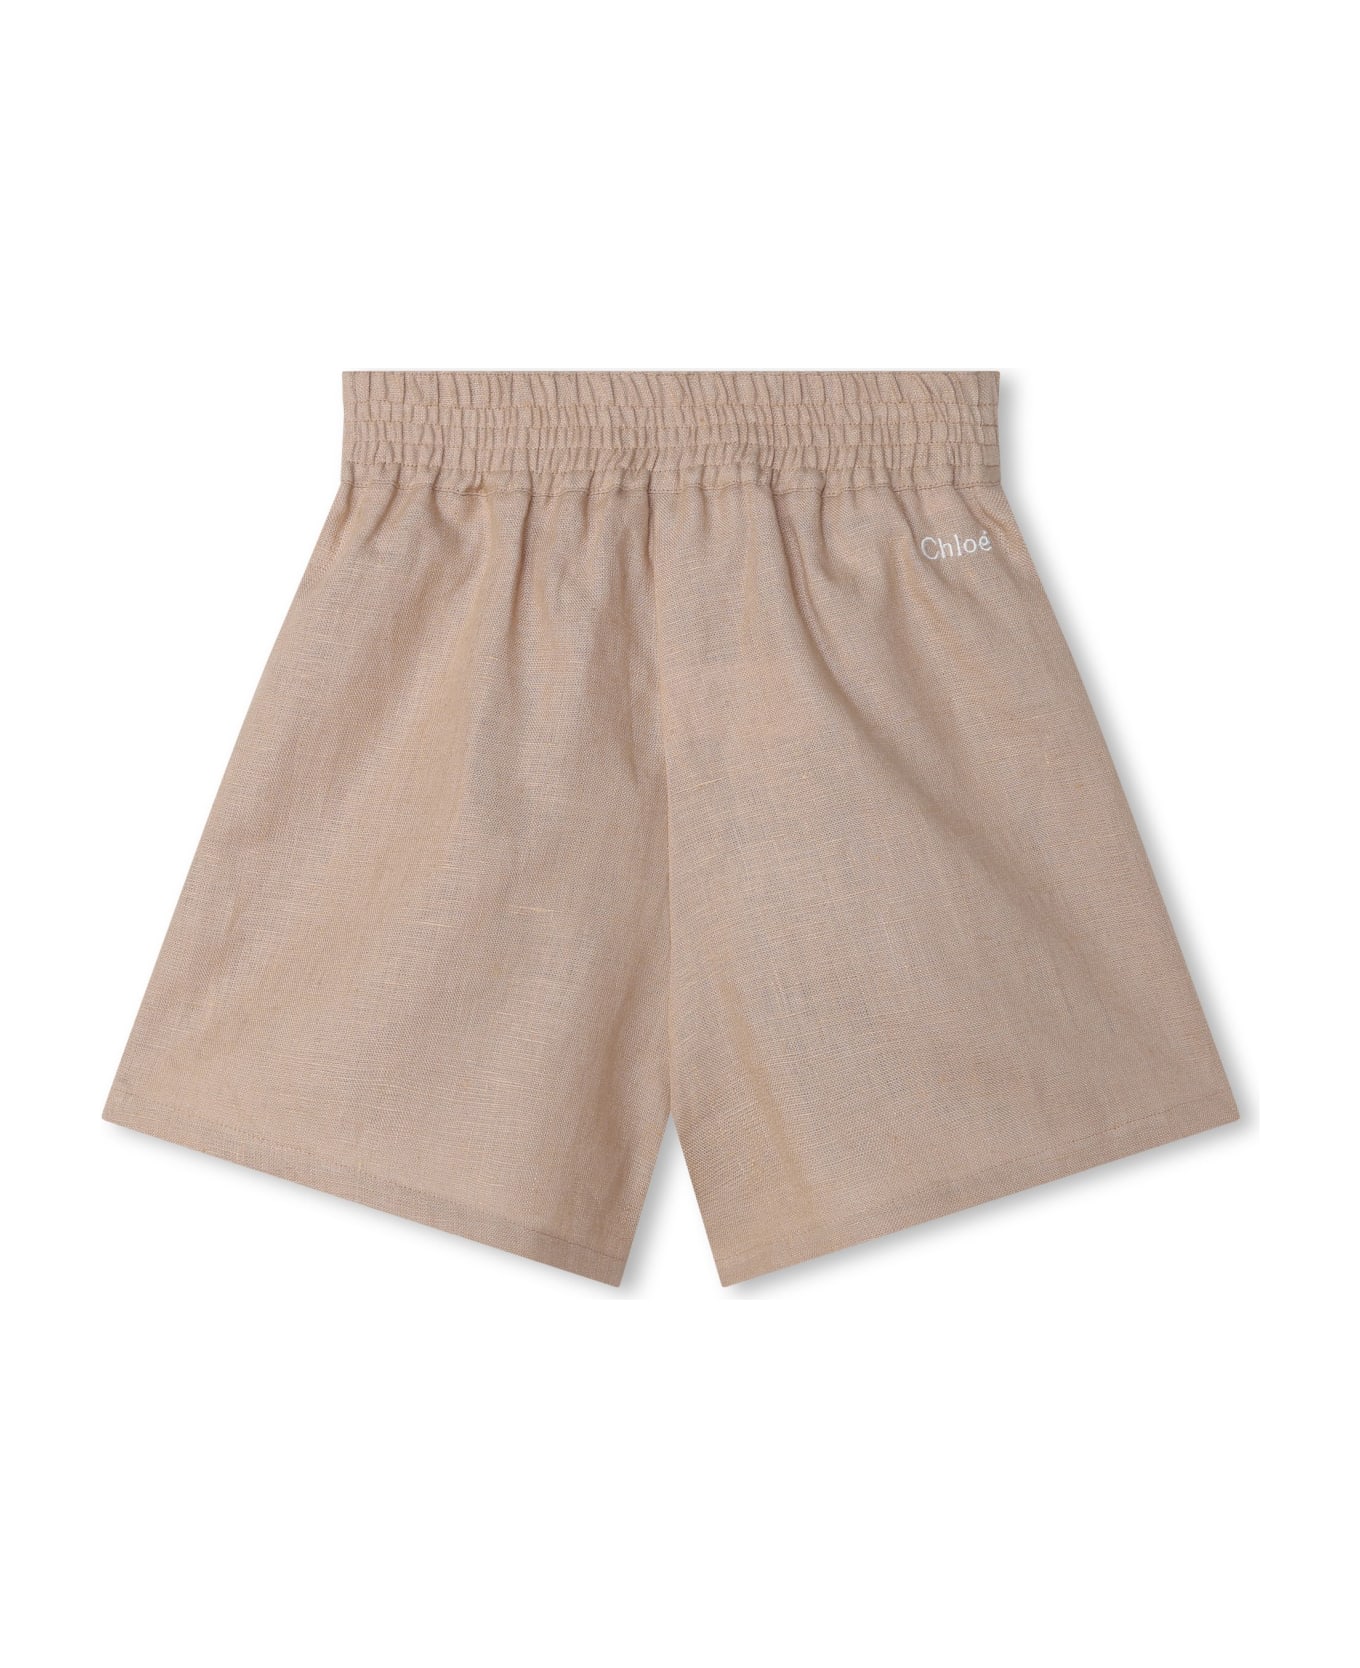 Chloé Bermuda Shorts With Embroidery - Beige